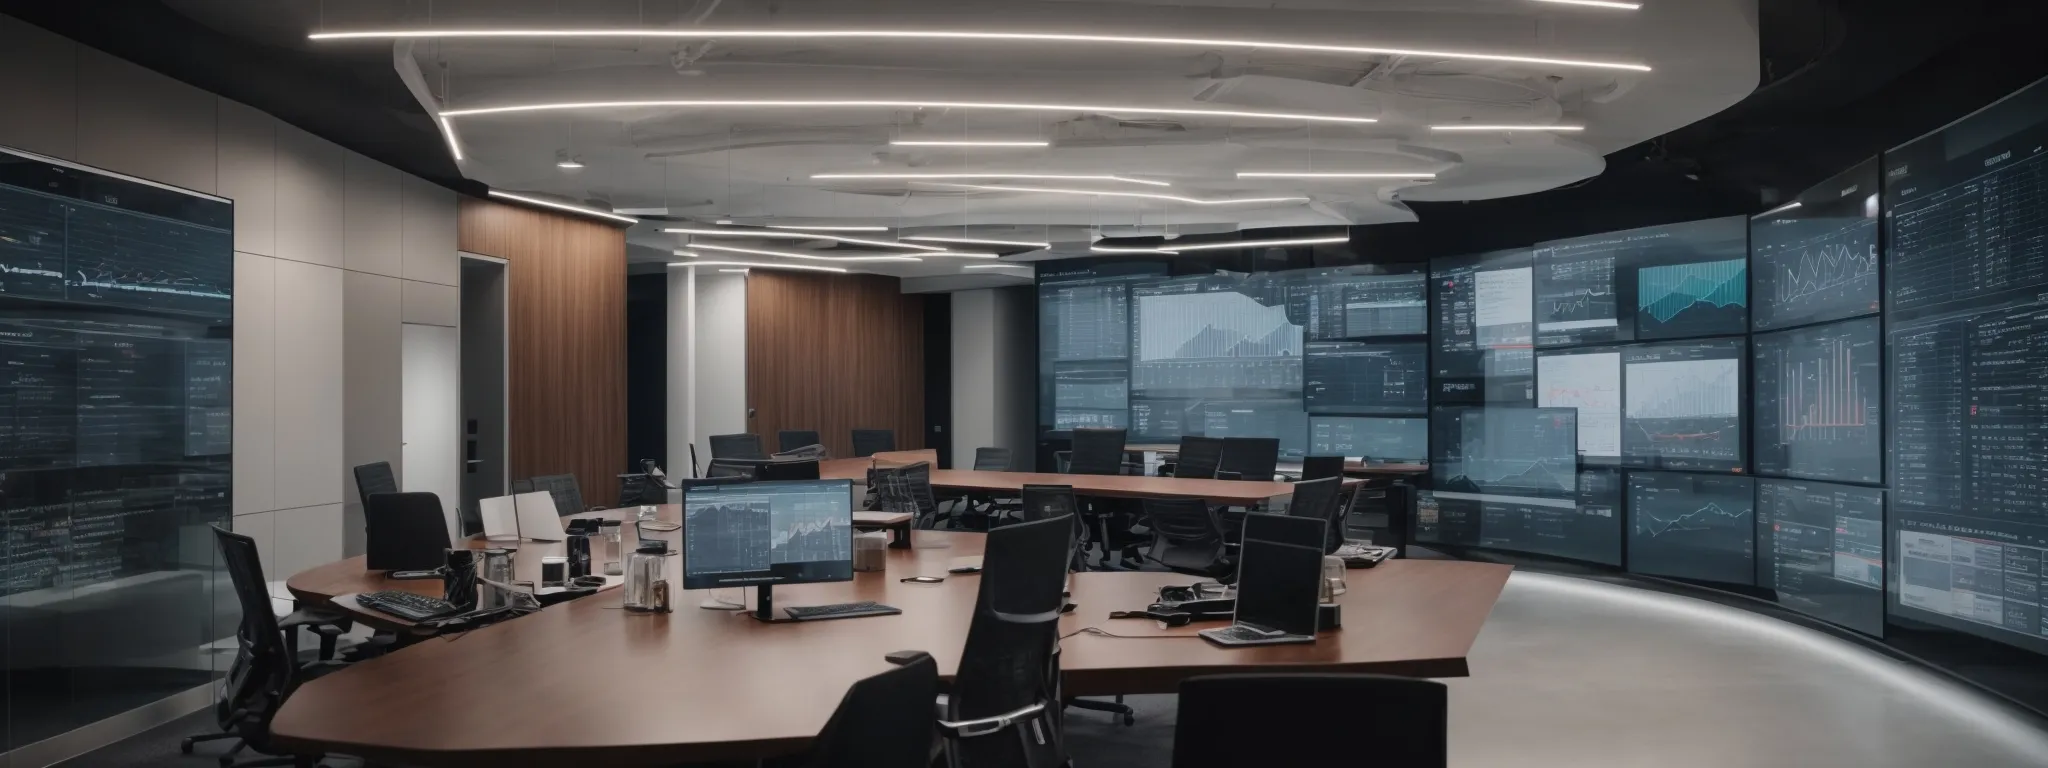 a modern office meeting room with a large digital screen displaying graphs and analytics data.